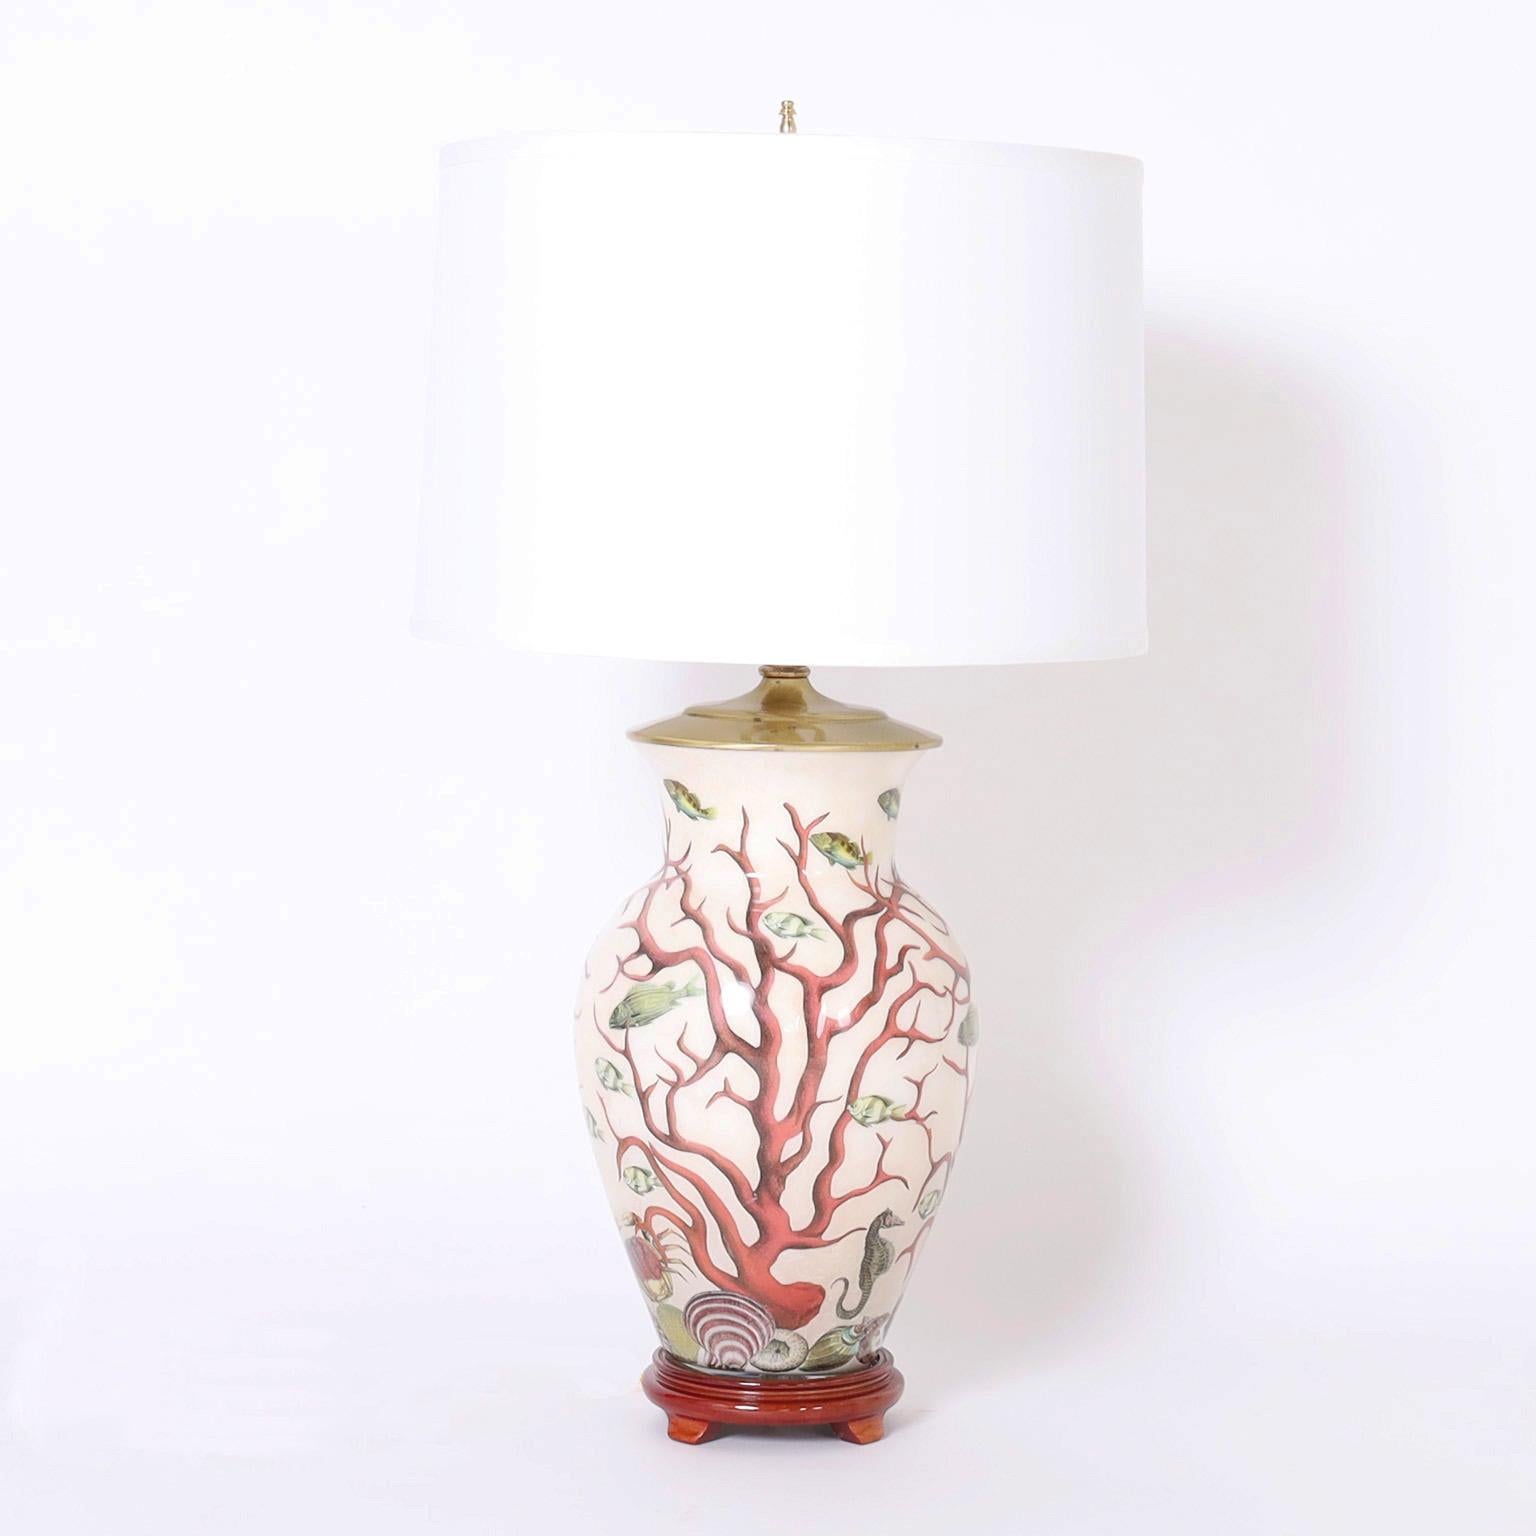 Standout pair of vintage table lamps crafted in porcelain in a classic form hand decorated in a sophisticated composition of red coral, fish, and seashells and presented on a turned wood base.